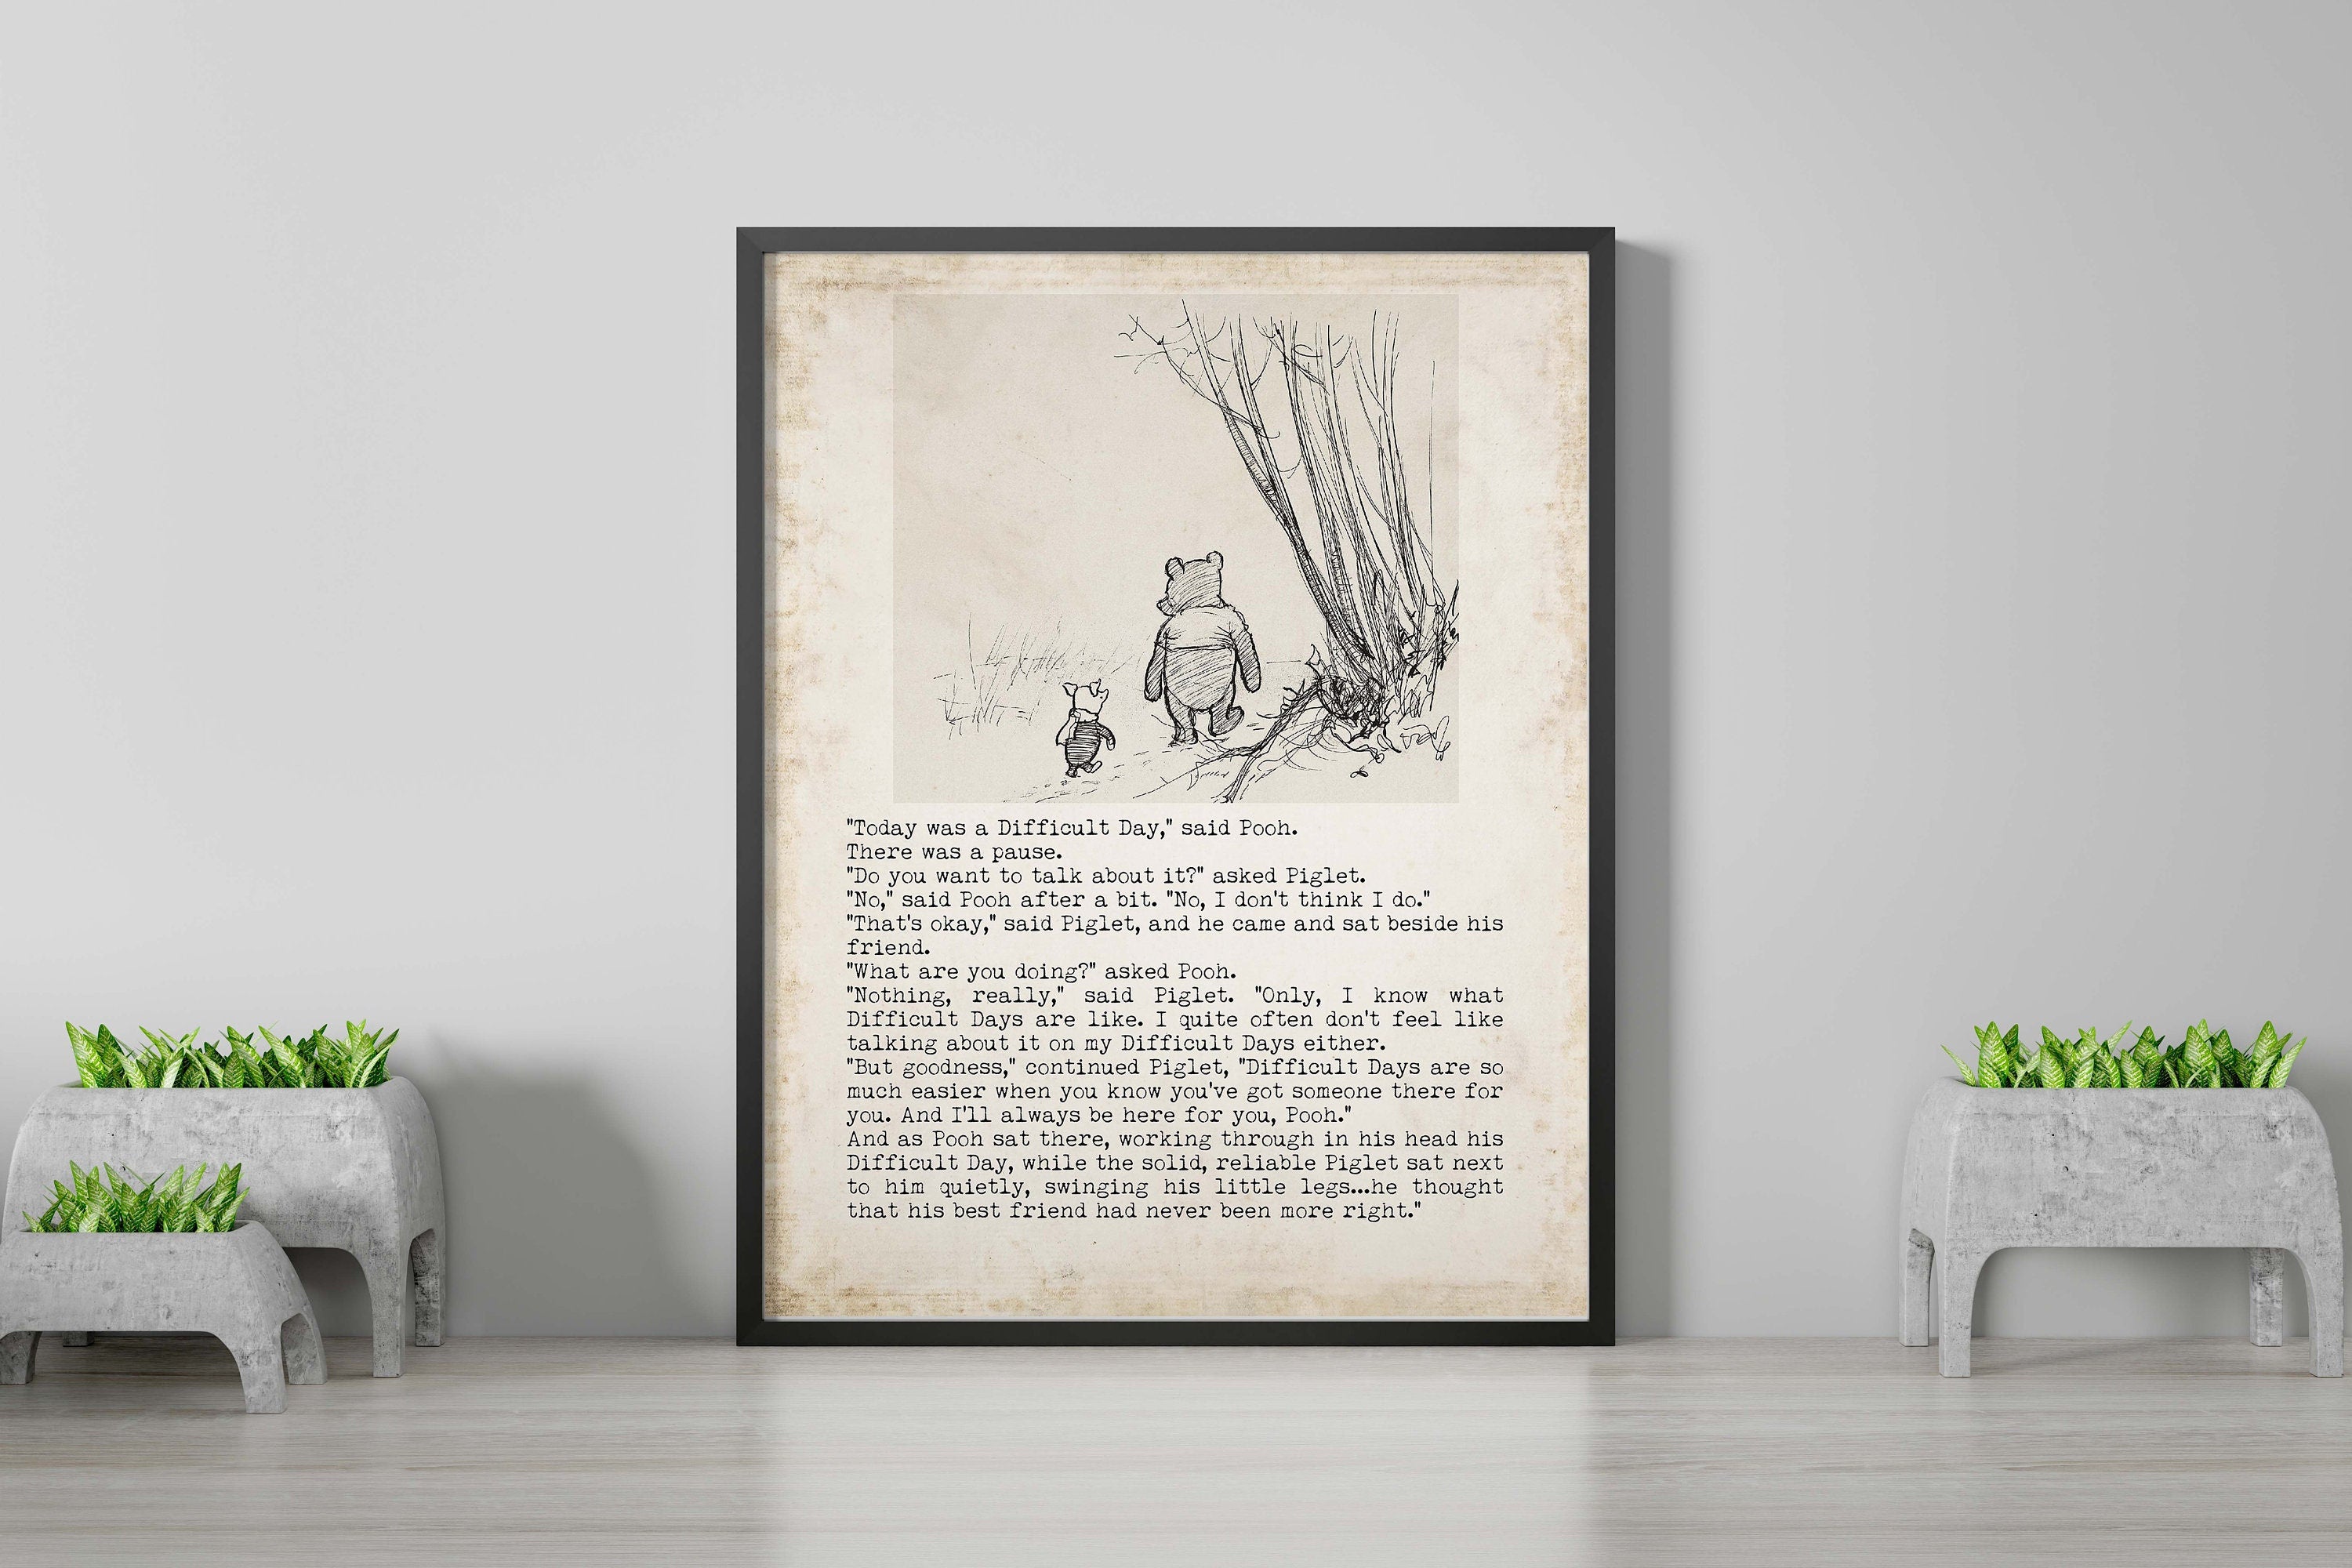 Difficult Days Winnie the Pooh Quote Unframed or Framed Nursery Wall Art Prints in Vintage Style with Pooh & Piglet Drawing, AA Milne